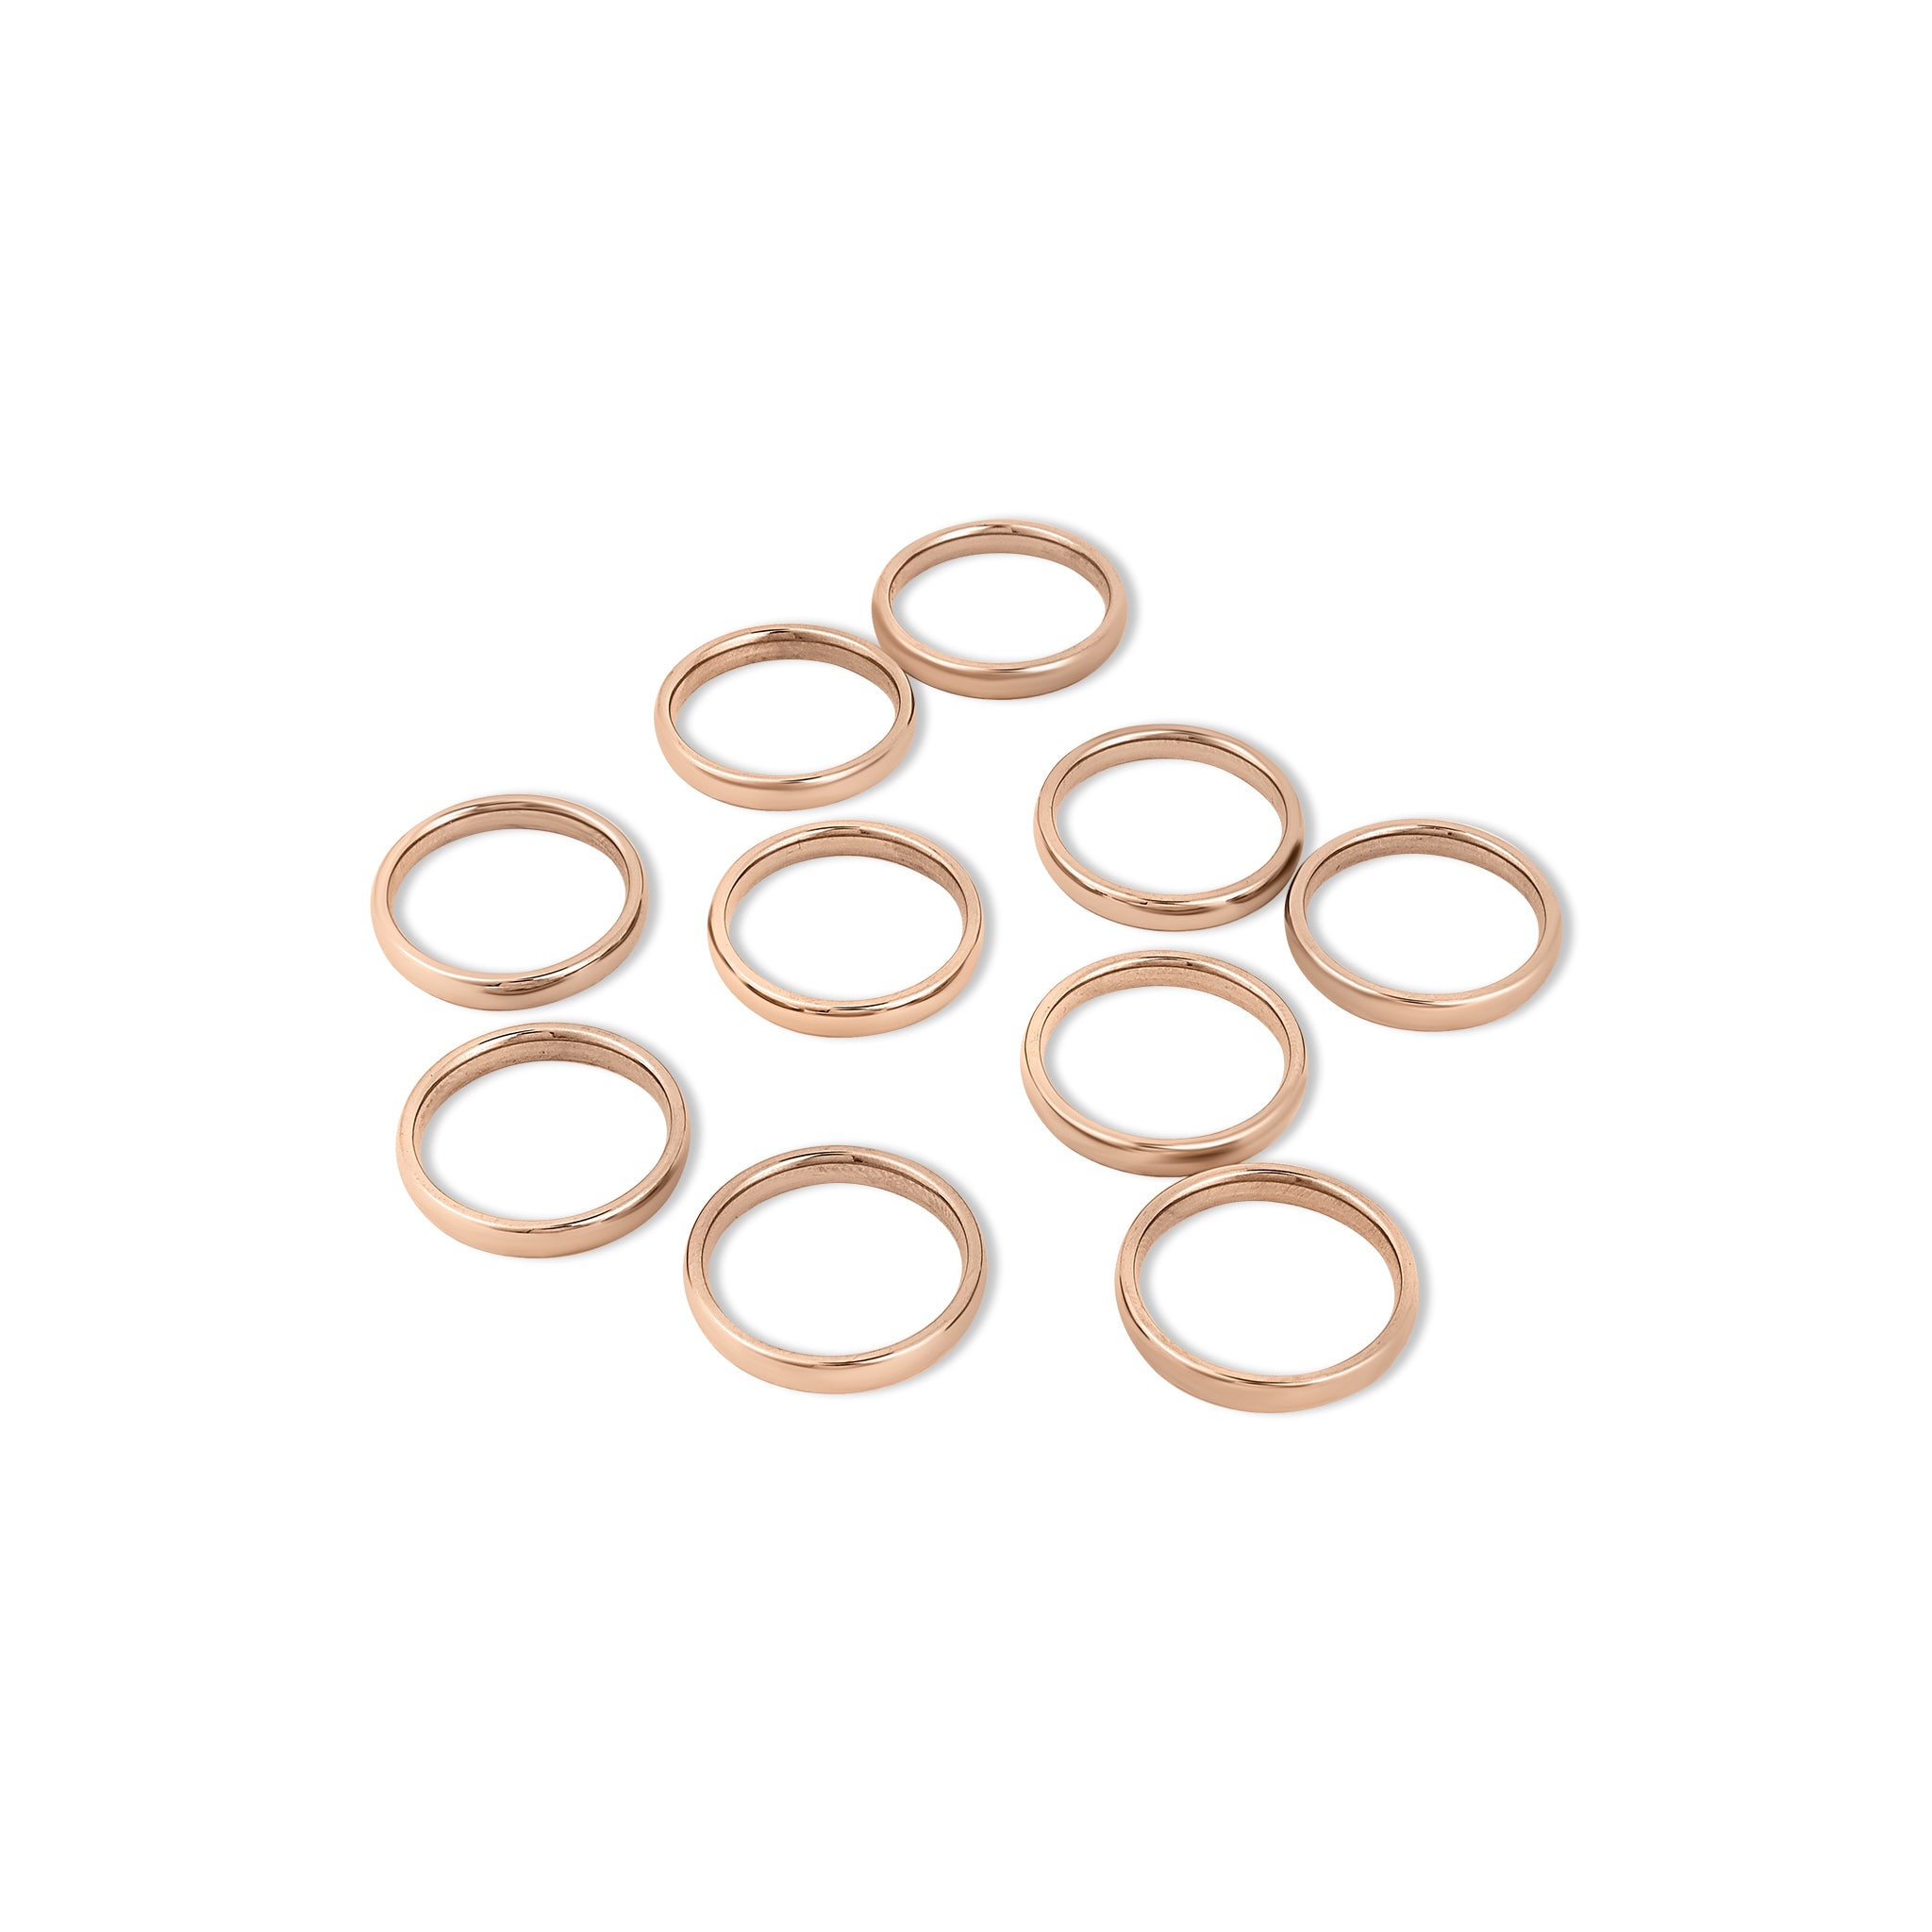 10 Pack - 3mm Size 6 Rose Gold Rounded Stainless Steel Blank Rings / CFR7008